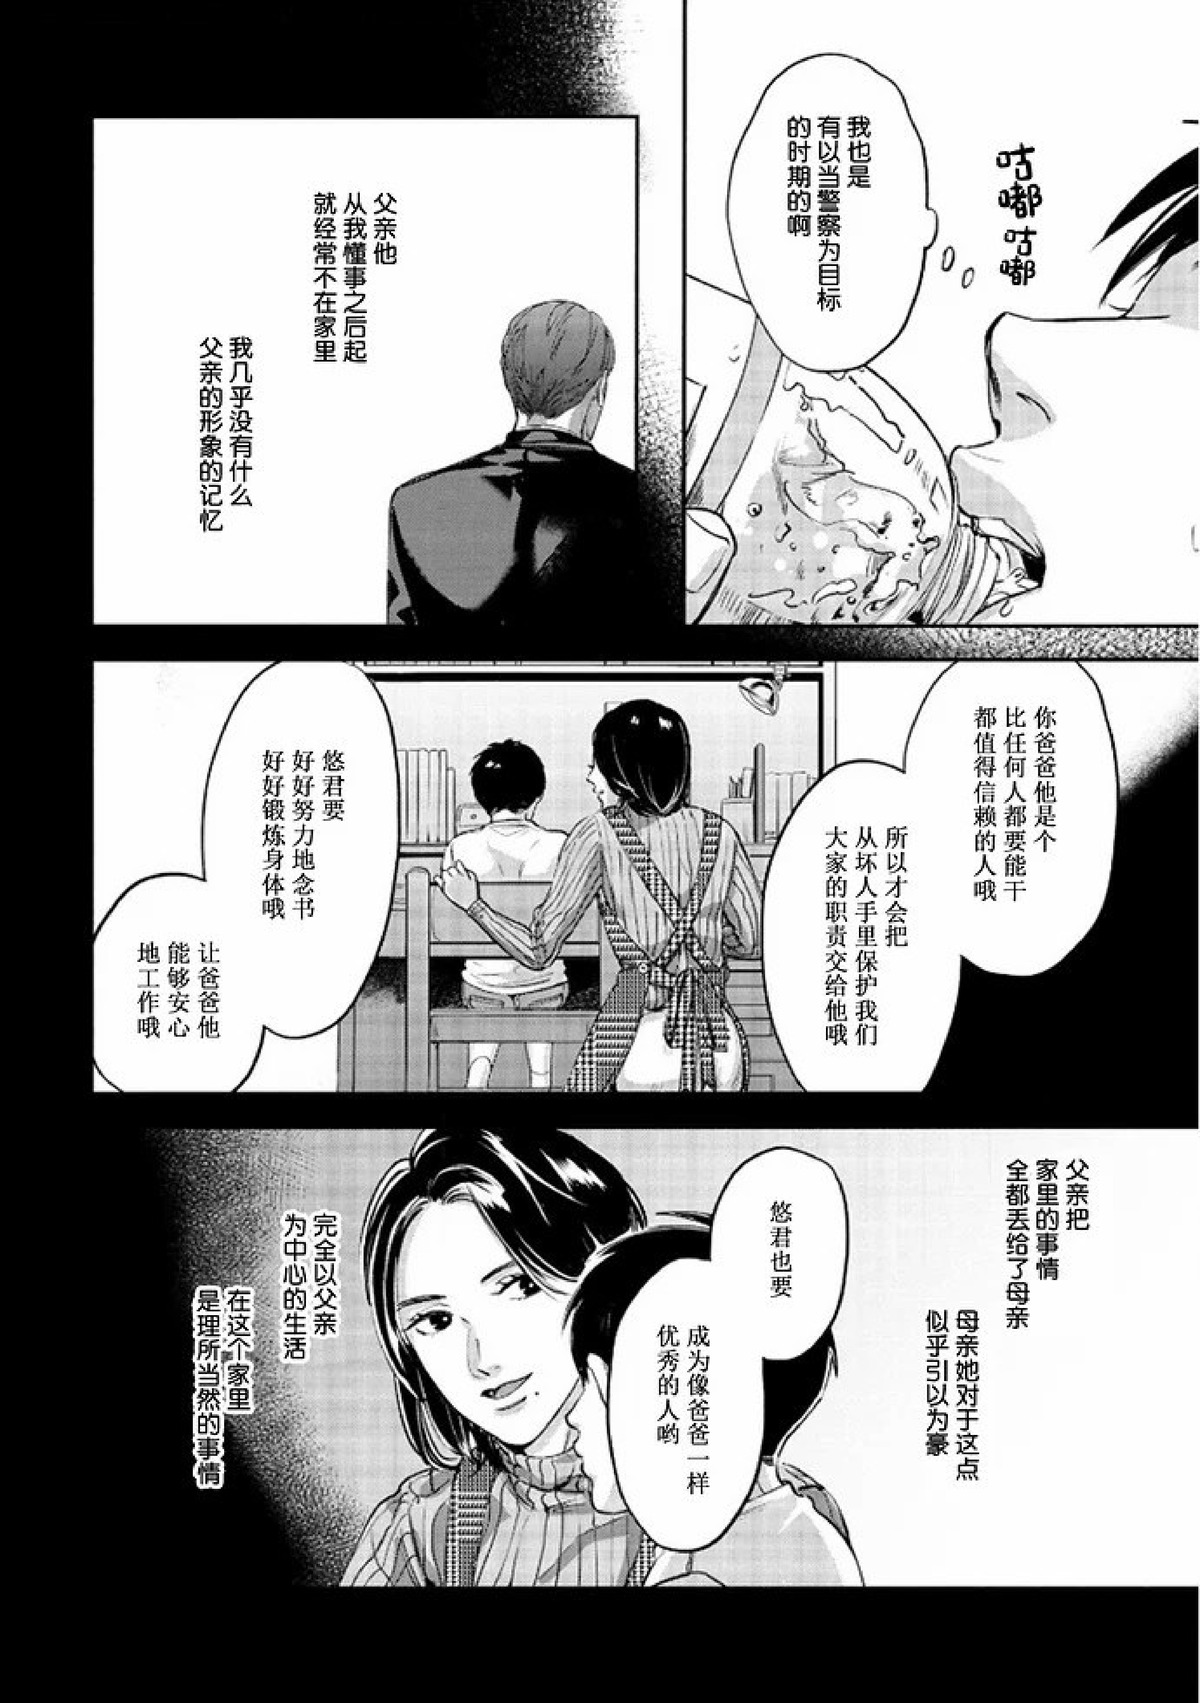 【Two sides of the same coin[耽美]】漫画-（上卷01-02）章节漫画下拉式图片-20.jpg